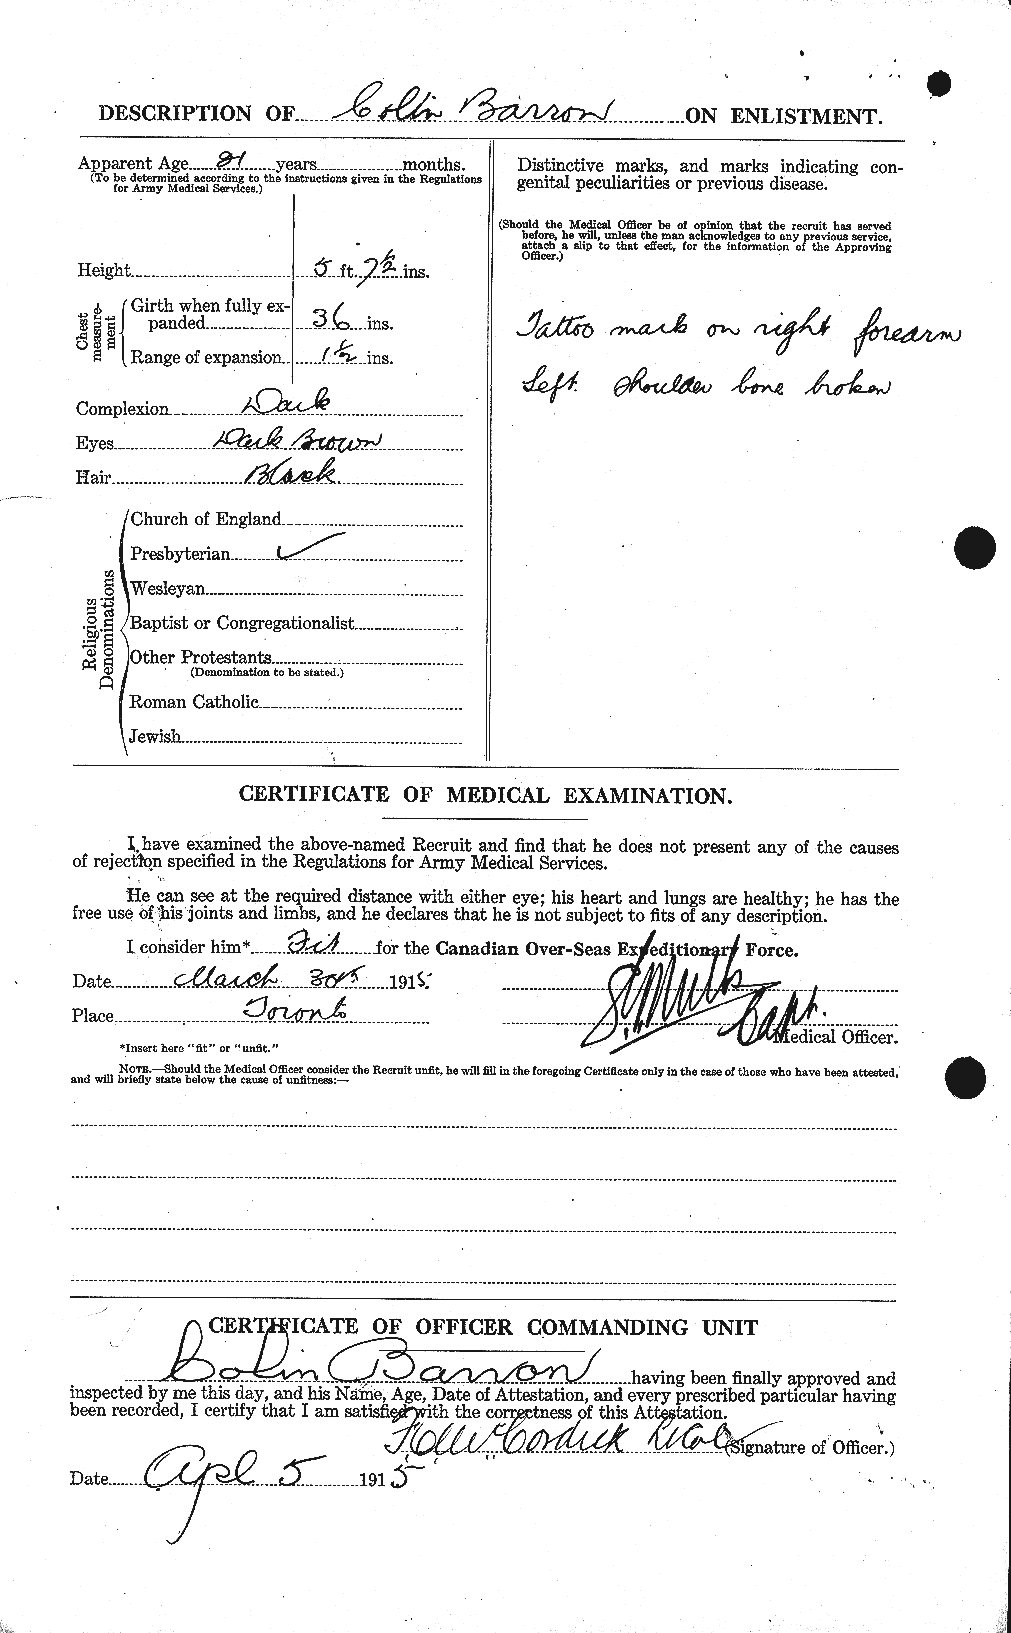 Personnel Records of the First World War - CEF 219941b